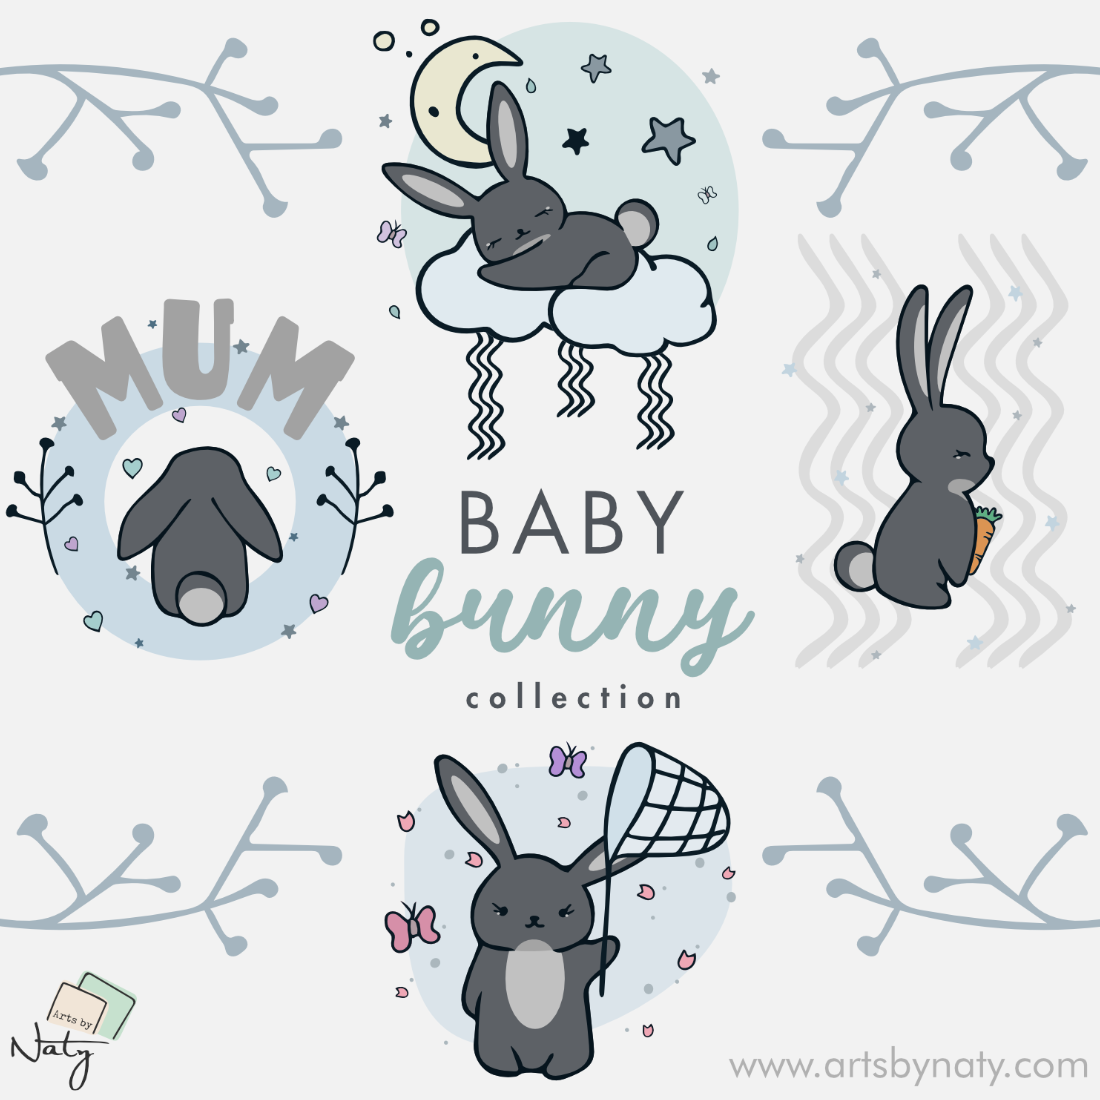 Baby Bunny Collection Clipart Illustration Bundle cover image.